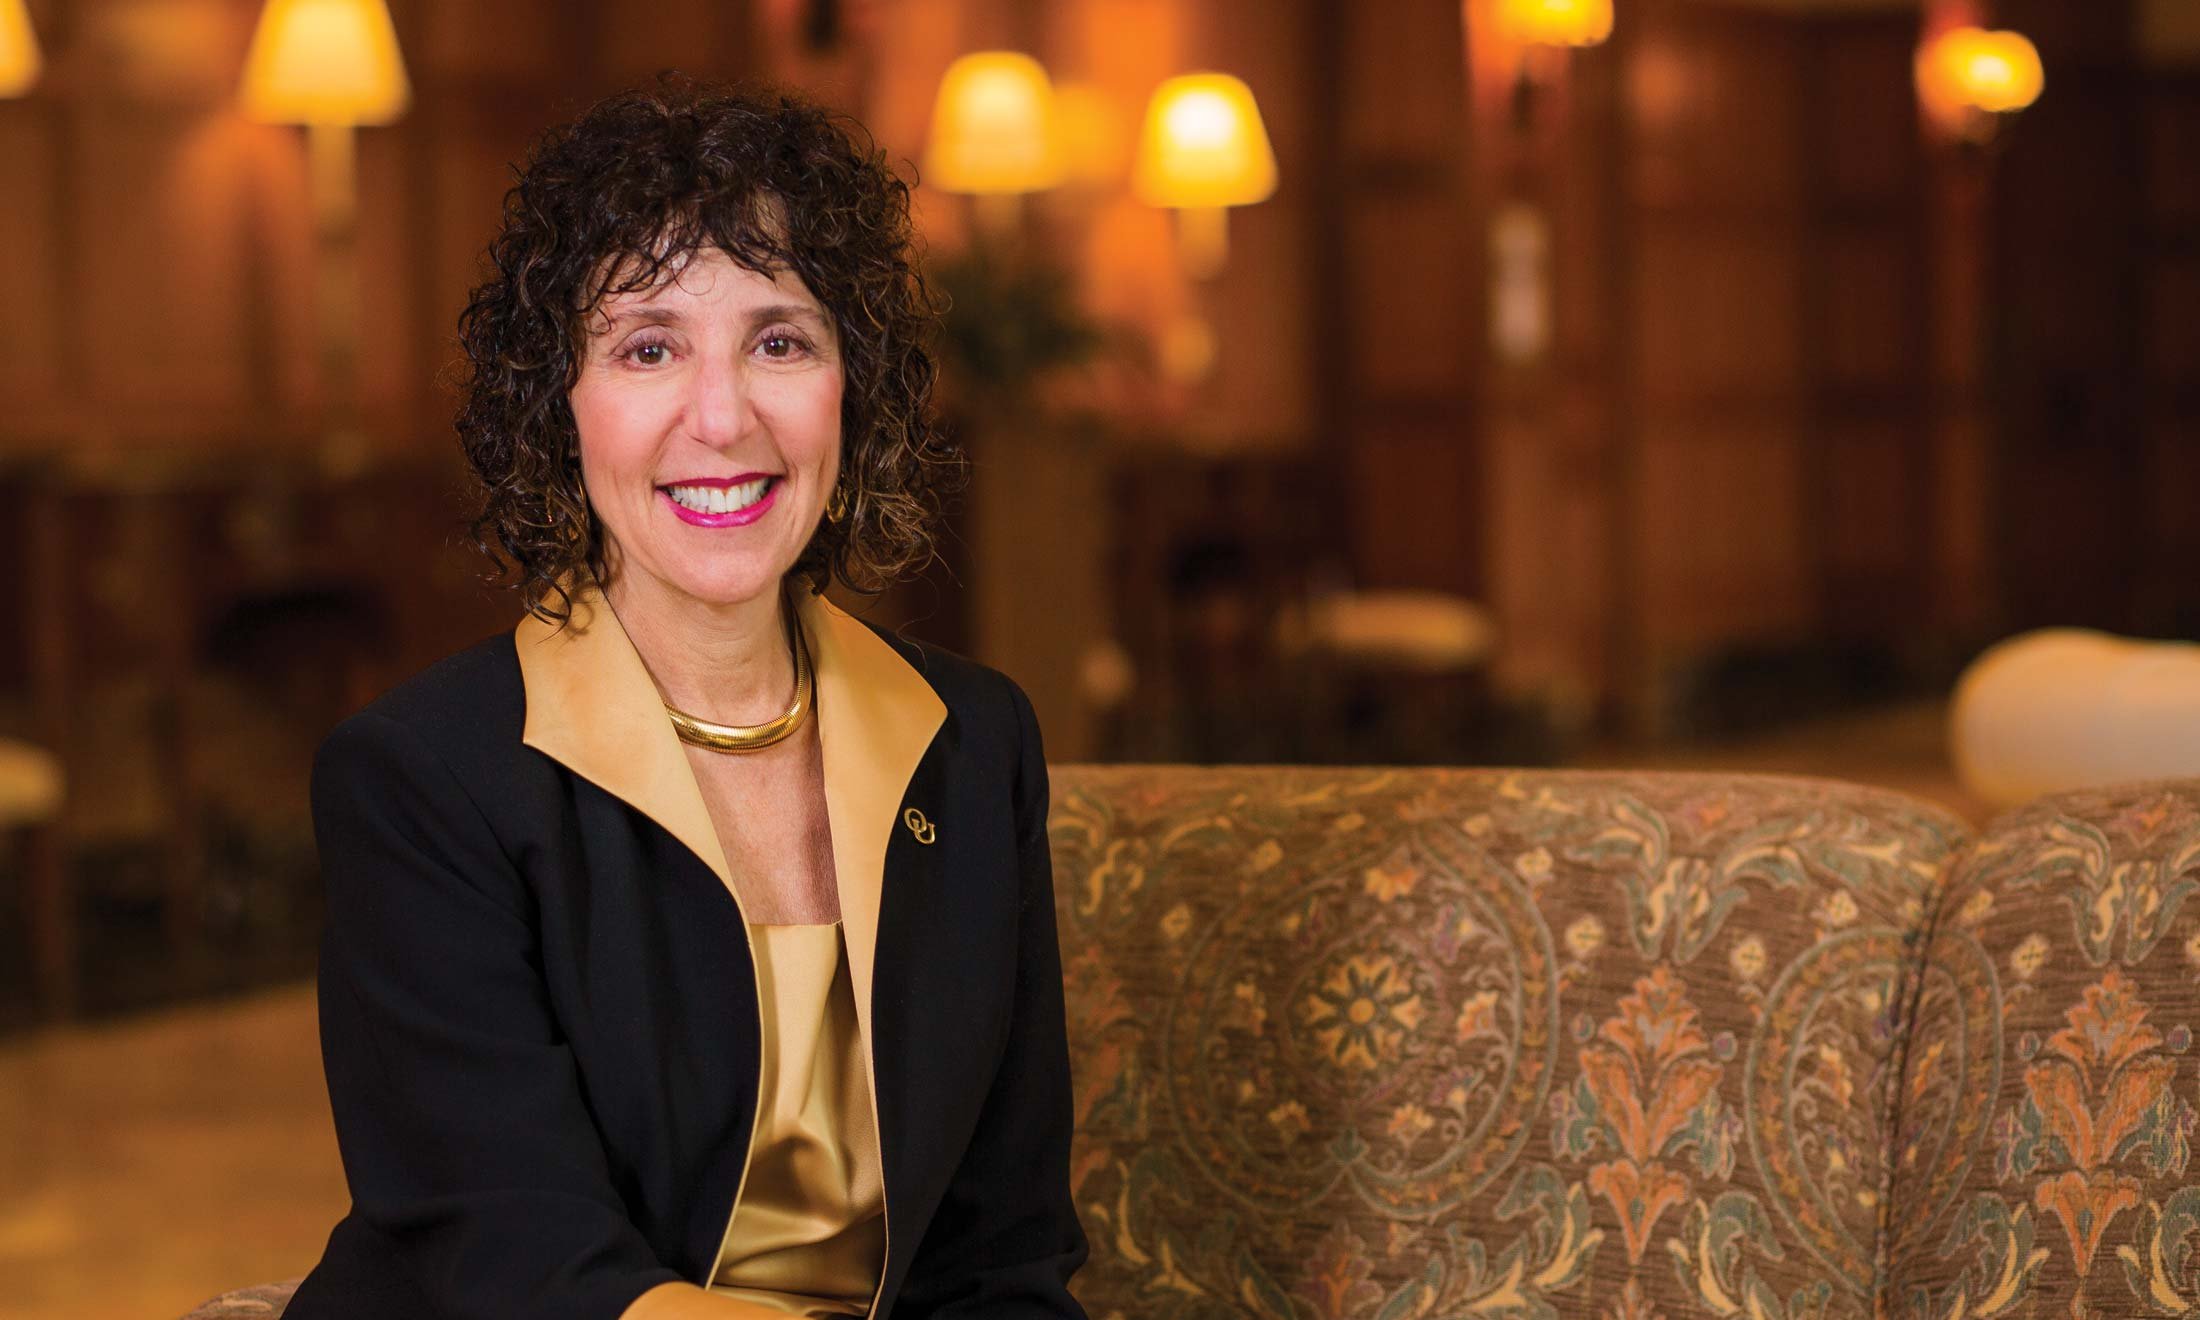 Dr. Ora Hirsch Pescovitz, Oakland University's seventh president sitting on a couch